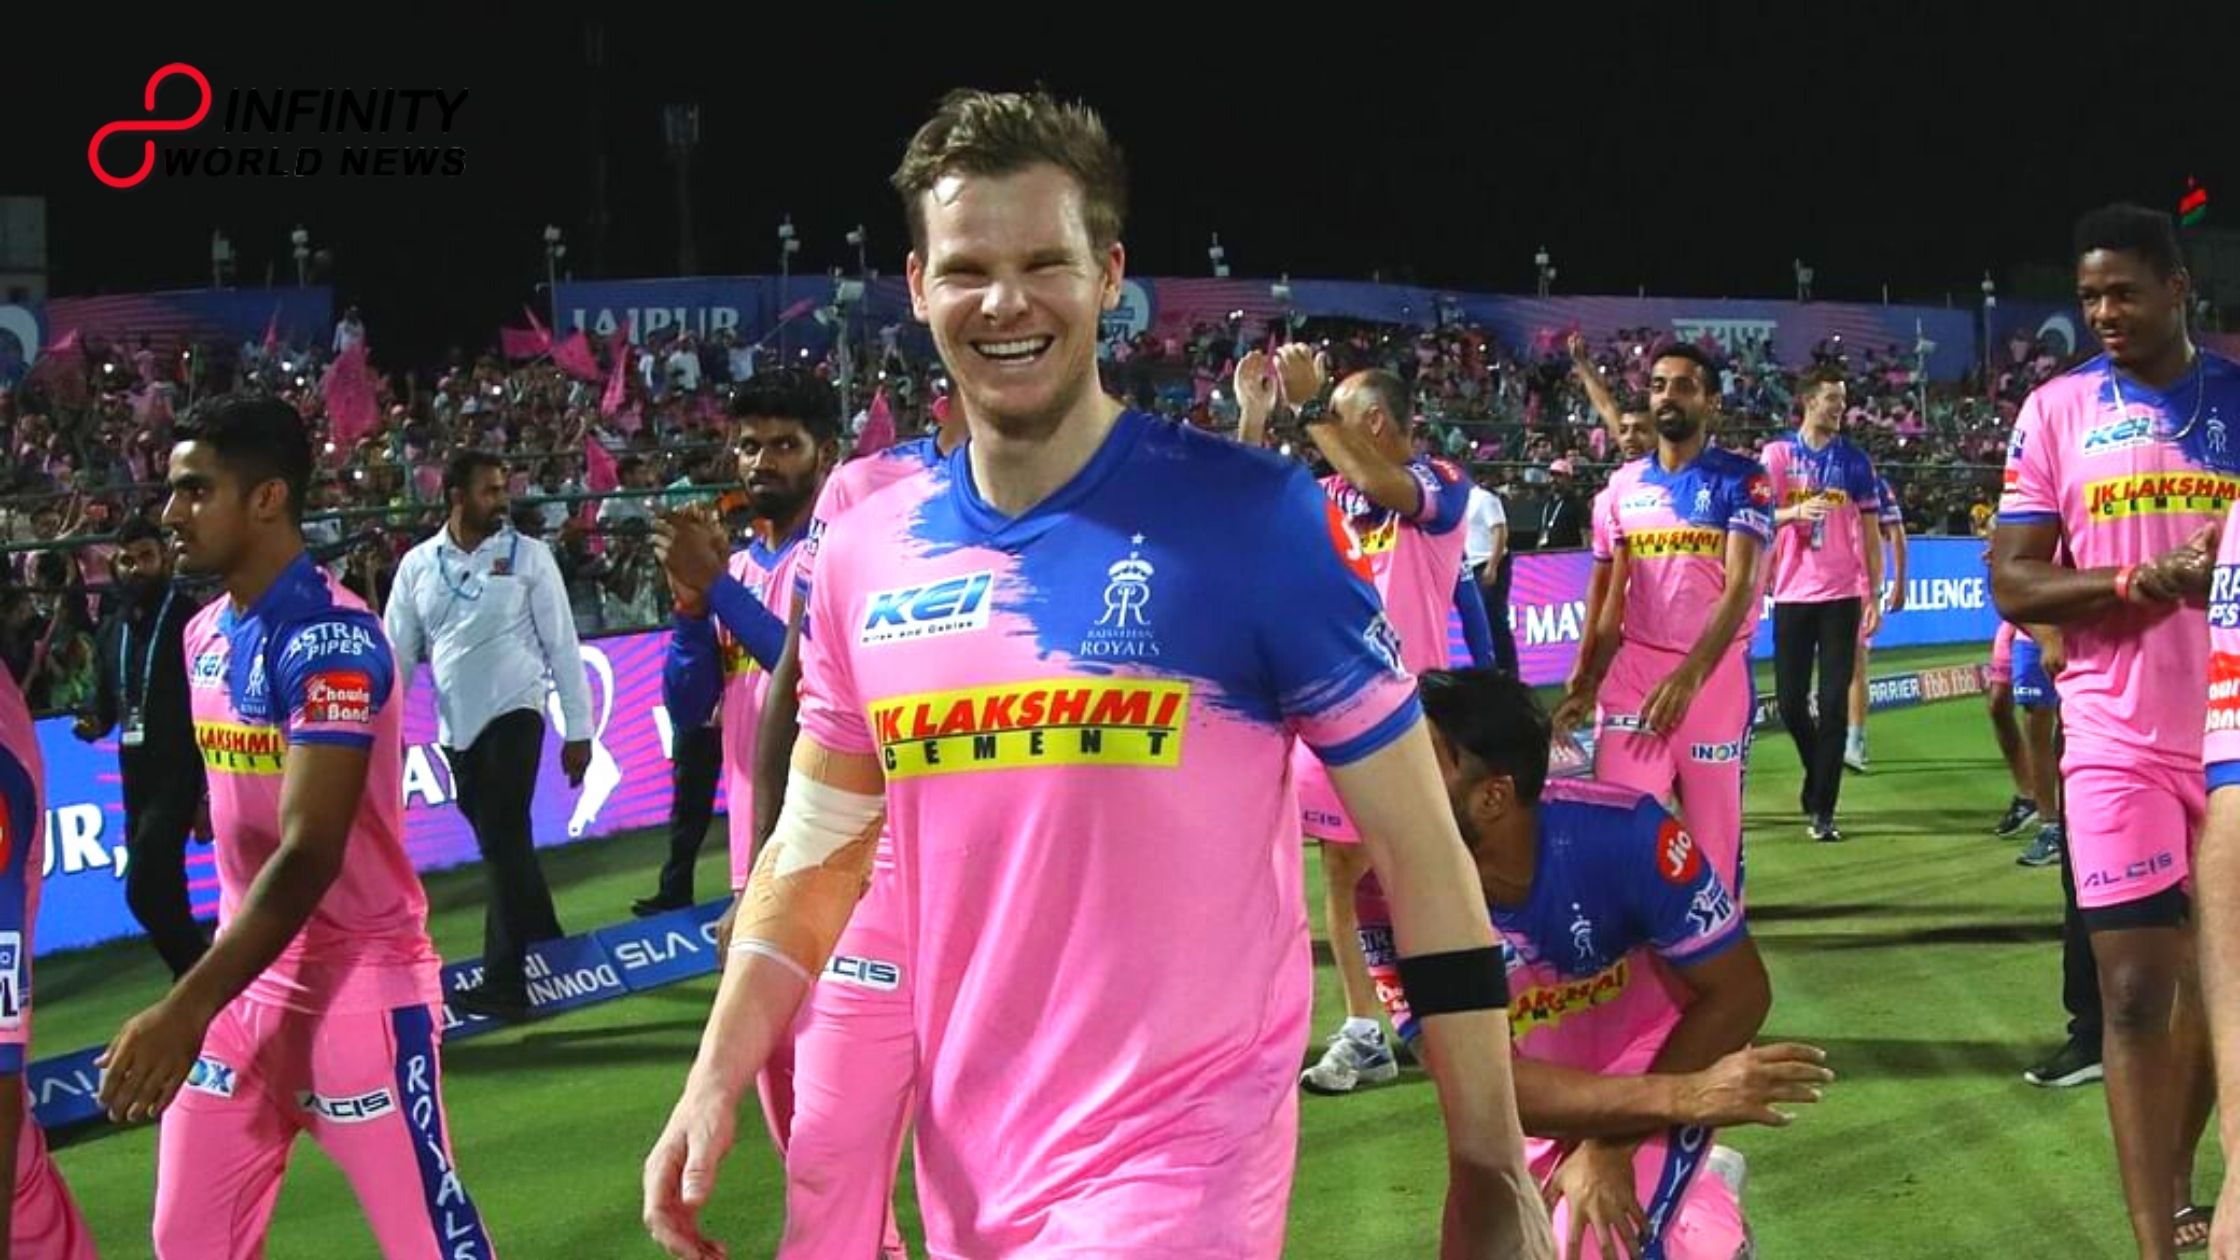 Australia and England players confronting each other before IPL 2020 has numerous positives_ Rajasthan Royals.